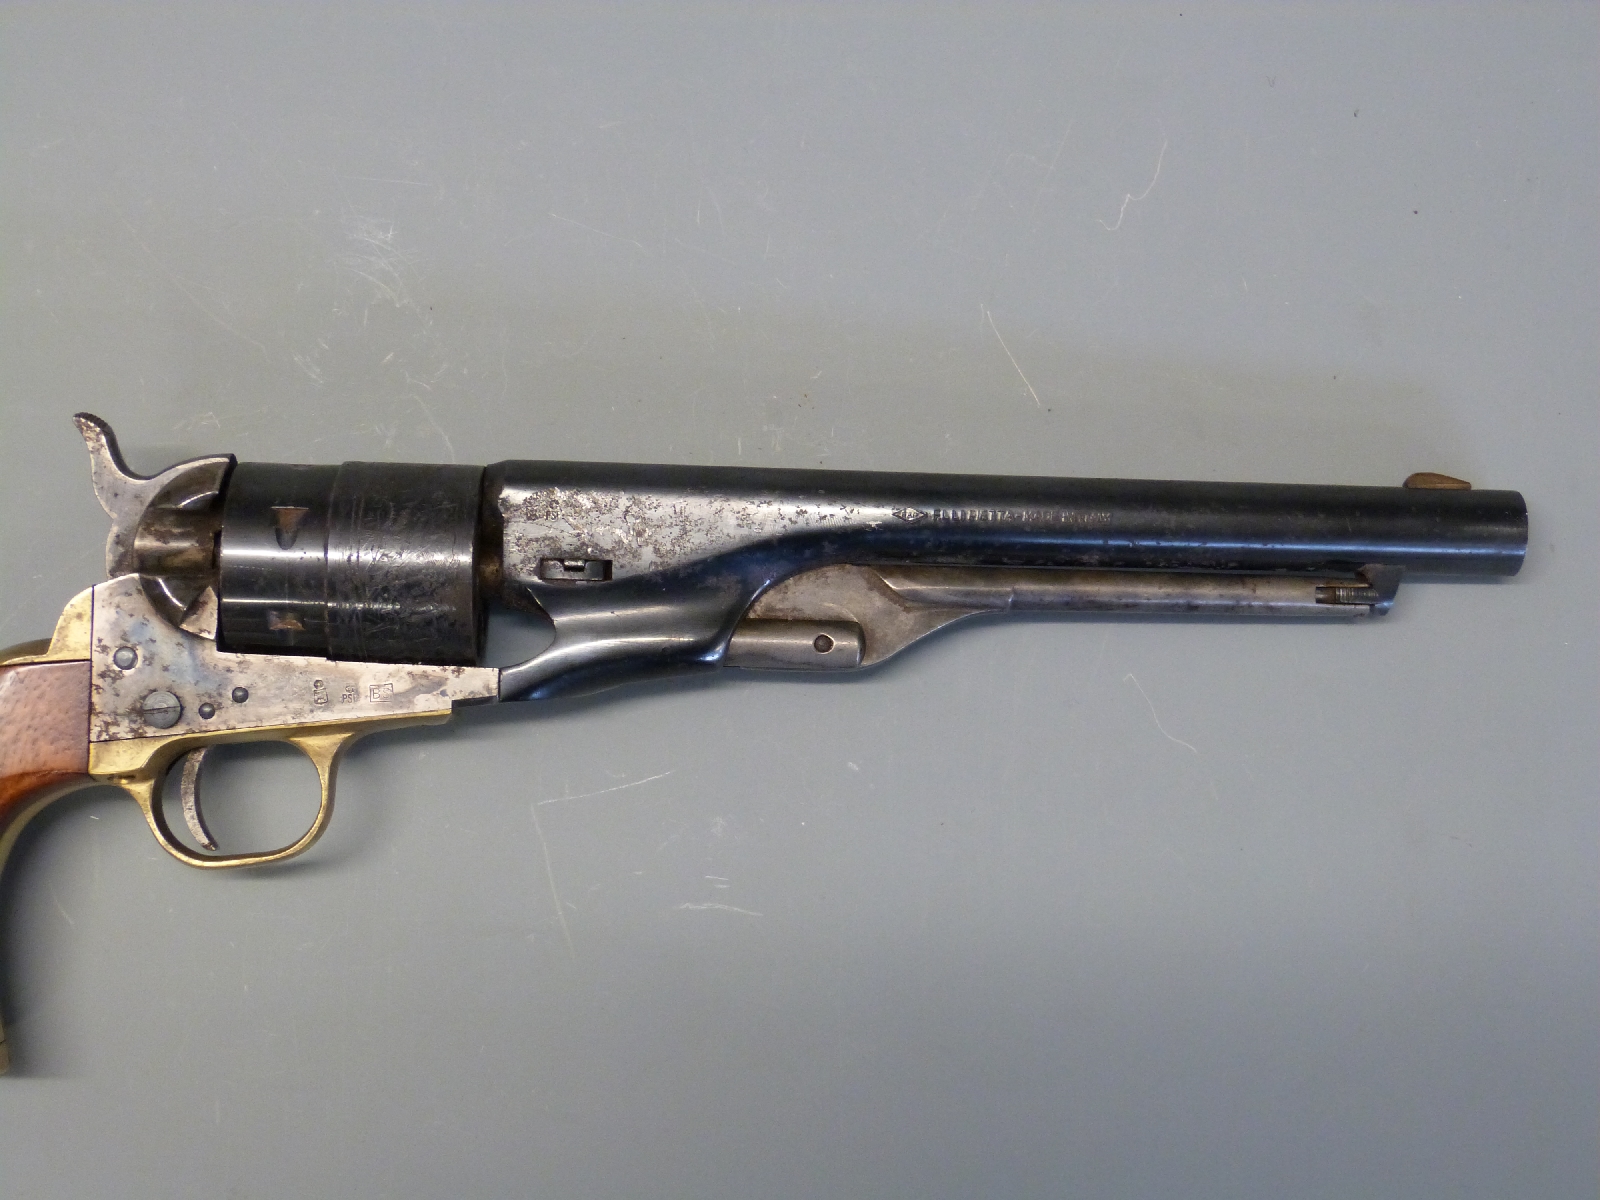 Pietta Western Army 1860 style 9mm blank firing six shot revolver with engraved scenes of ships to - Image 3 of 6